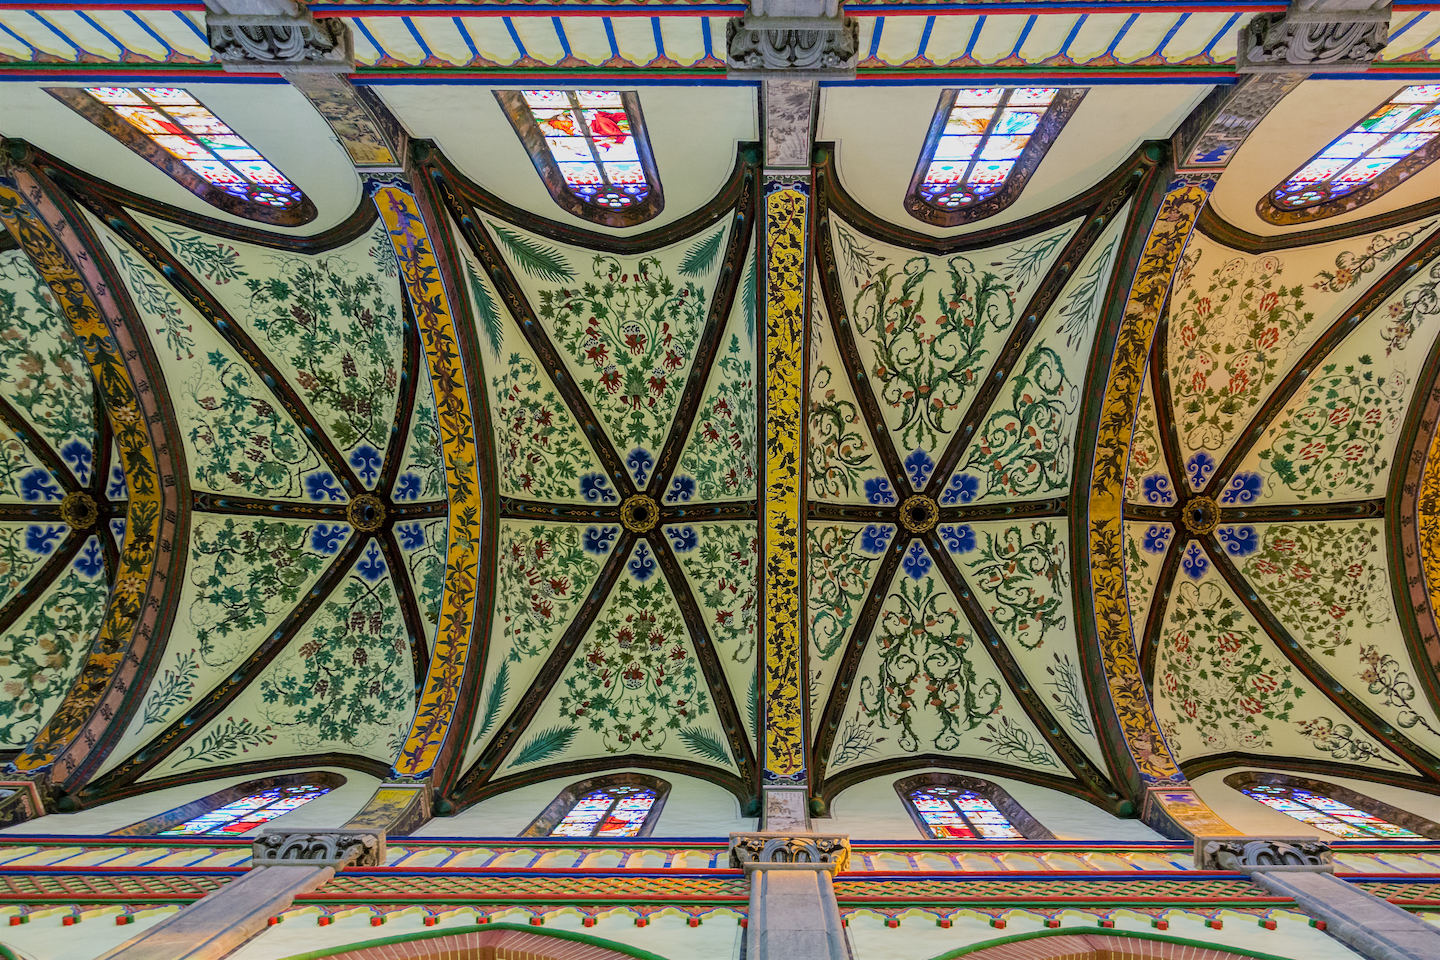 The Spectacular Ceiling at St. Joseph's Cathedral